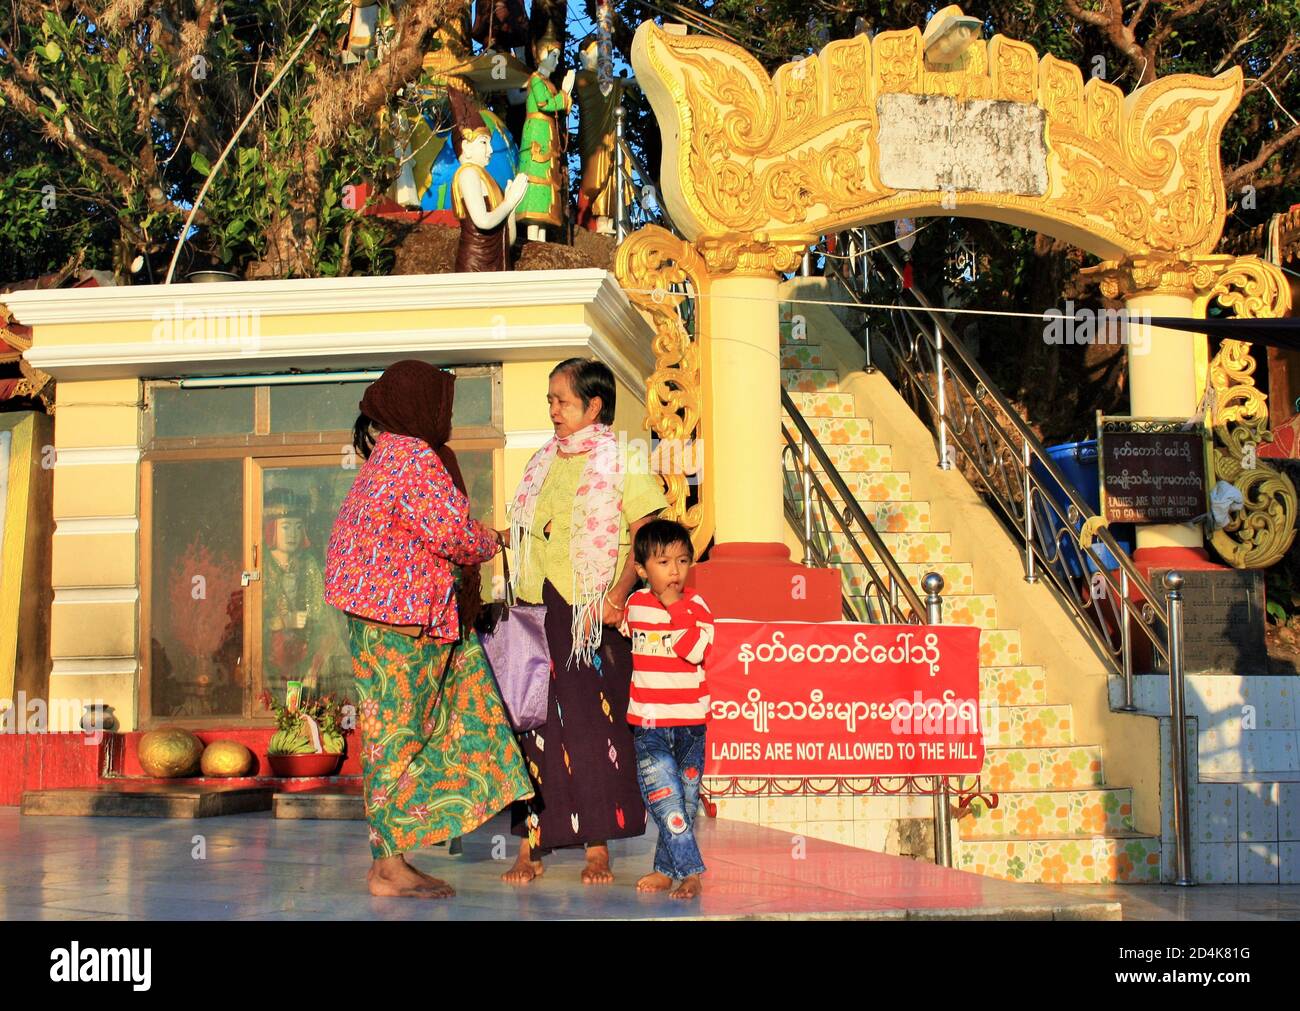 Kyaikto, Mon State Myanmar - December 5, 2019: Two Burmese women and a child standing next to a sign that says 'Ladies are not allowed to the hill' Stock Photo